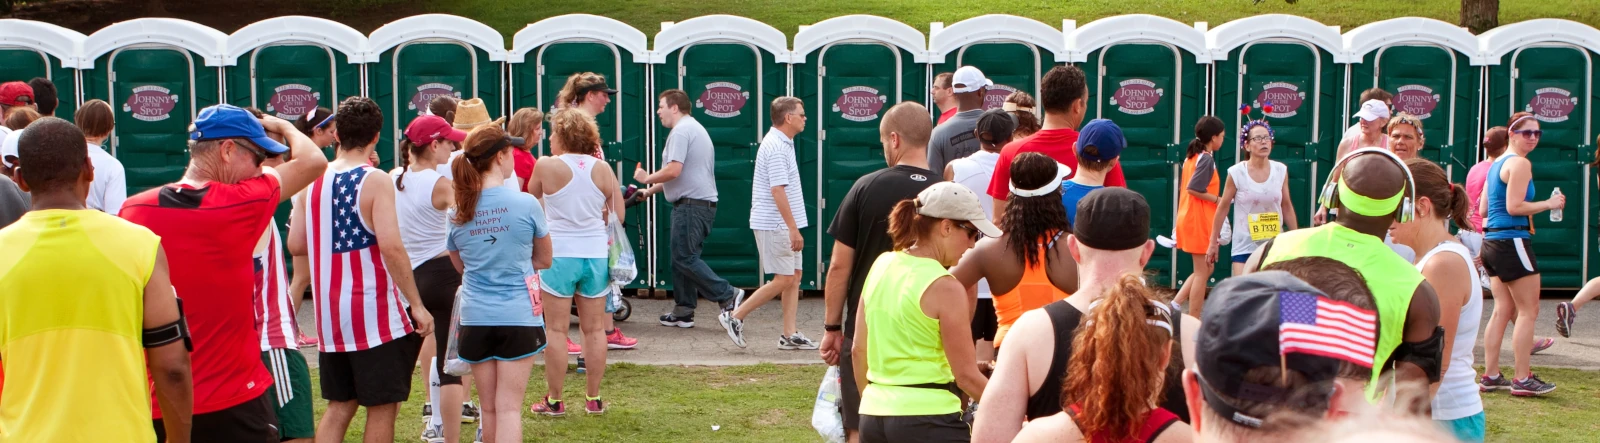 Lines of runners waiting to use portable toilets